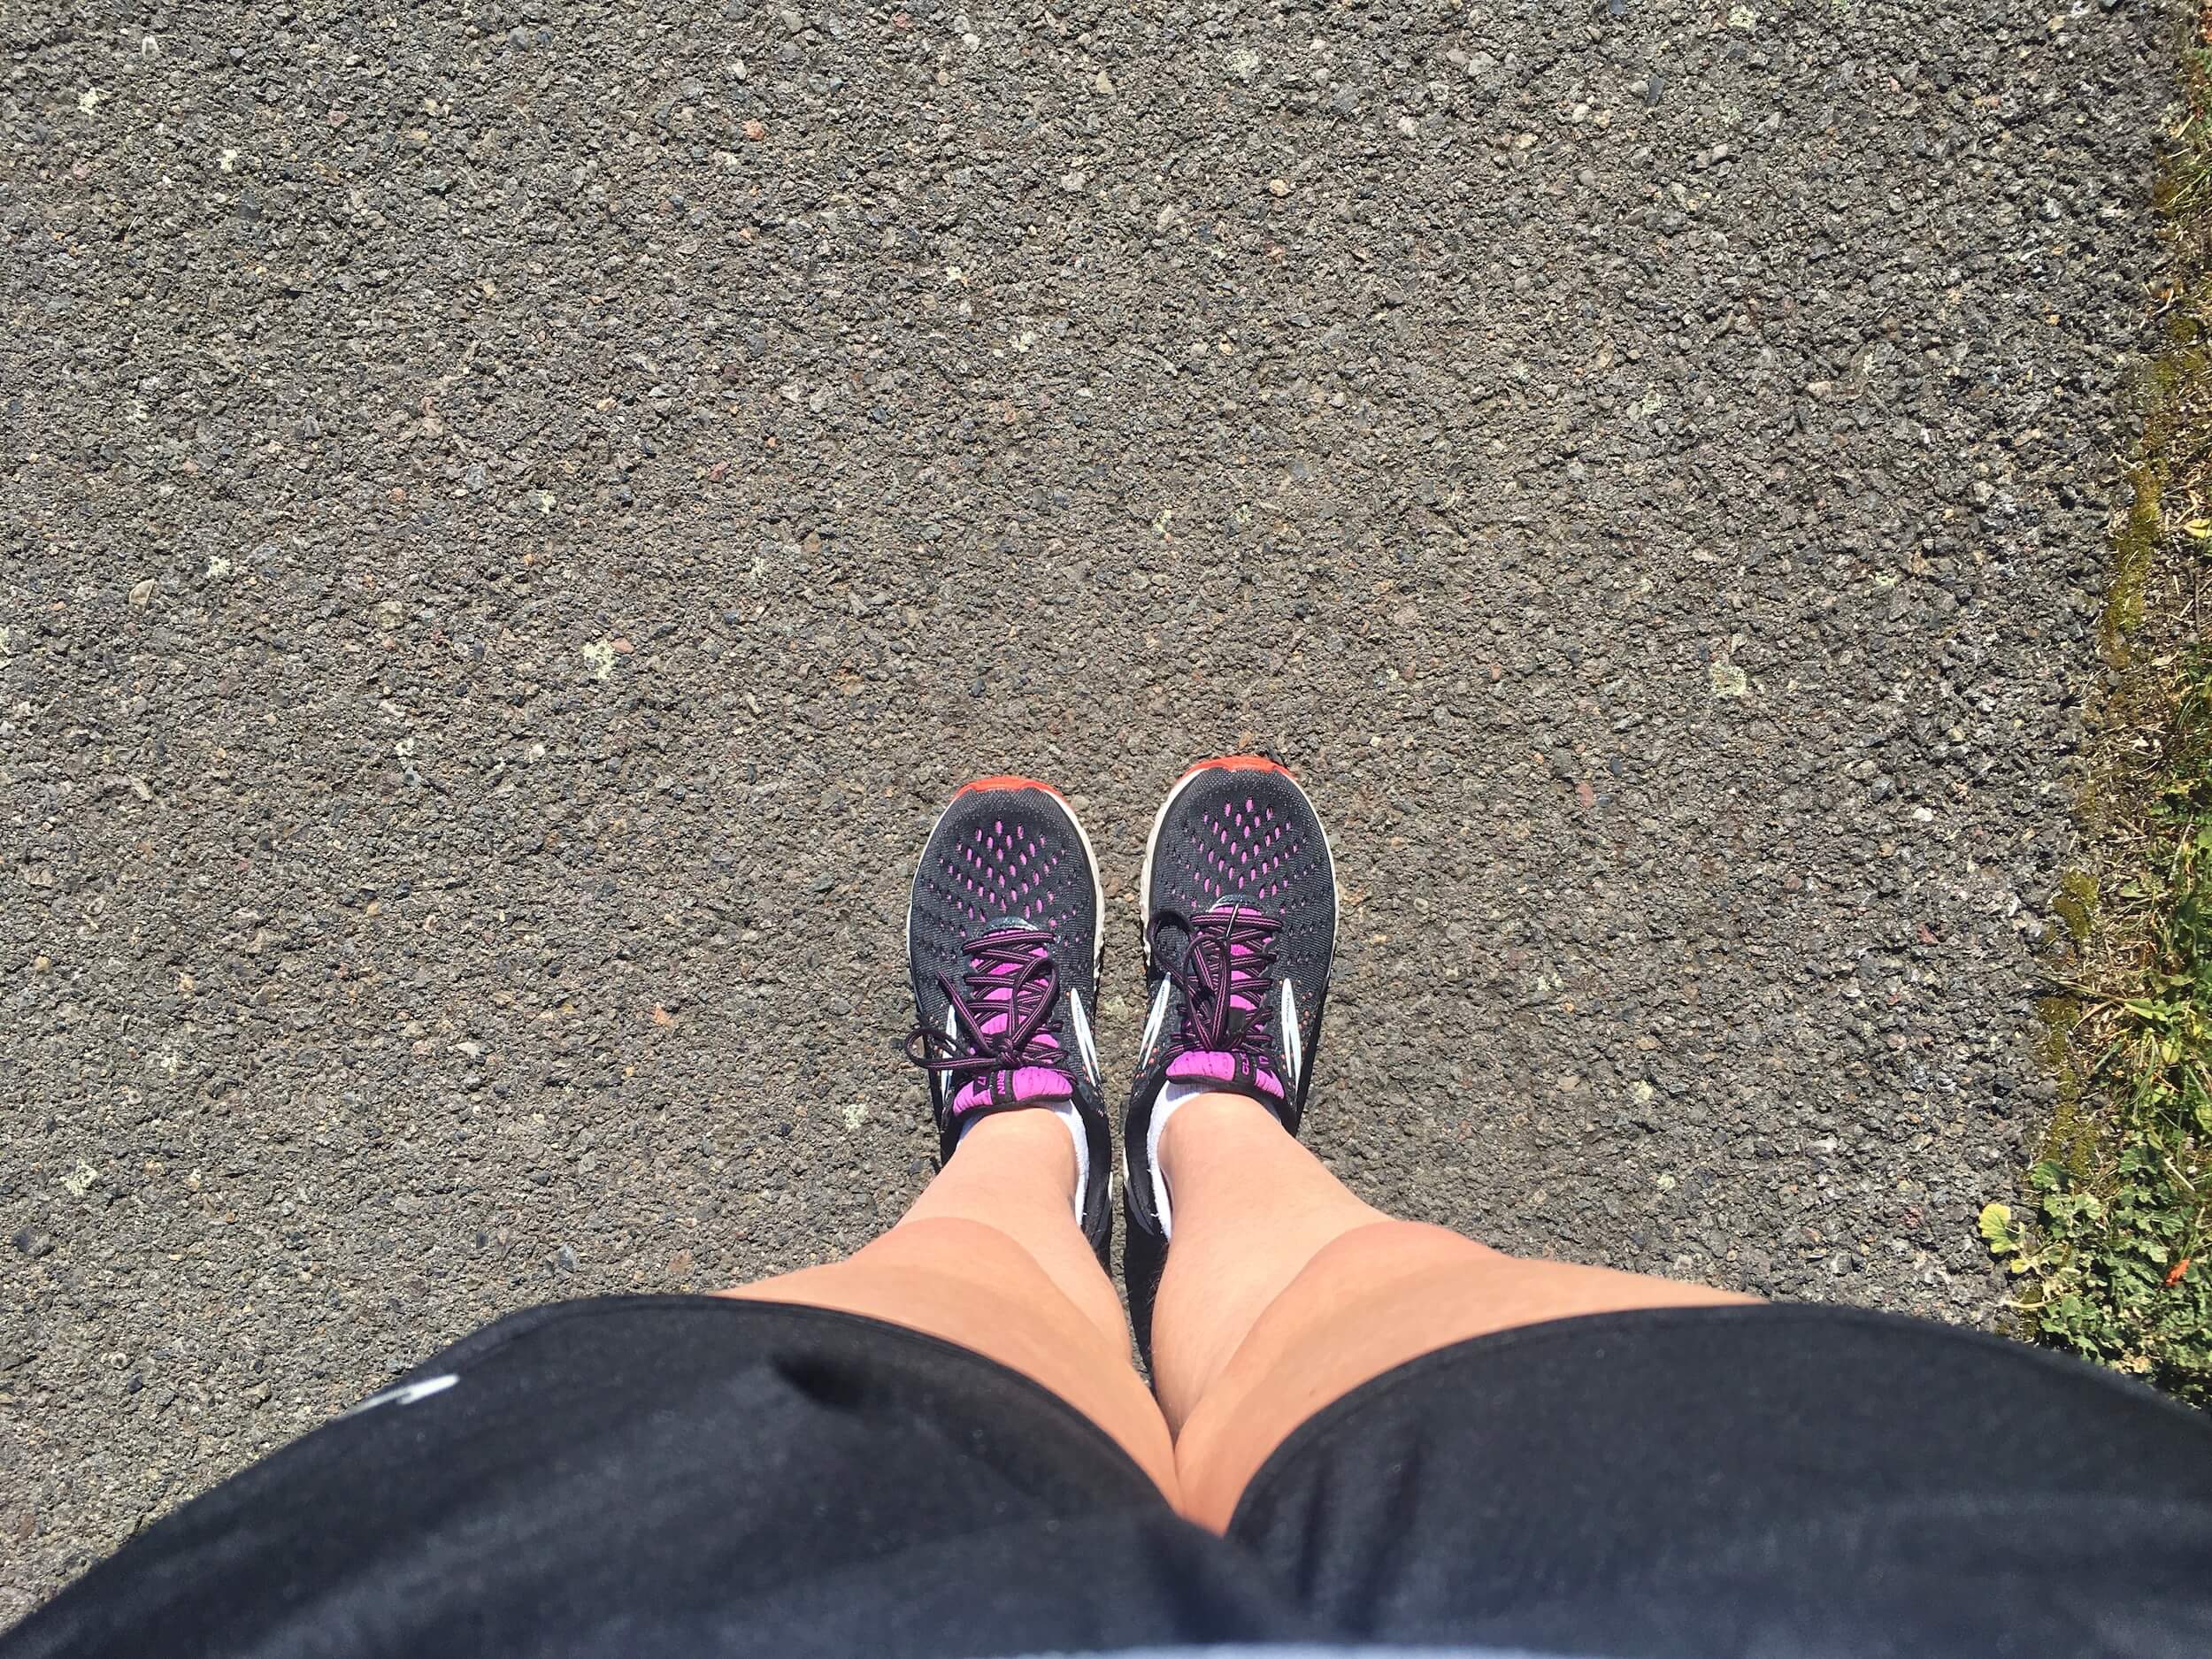 a photo of my legs in shorts with my feet in running shoes, on top of tar